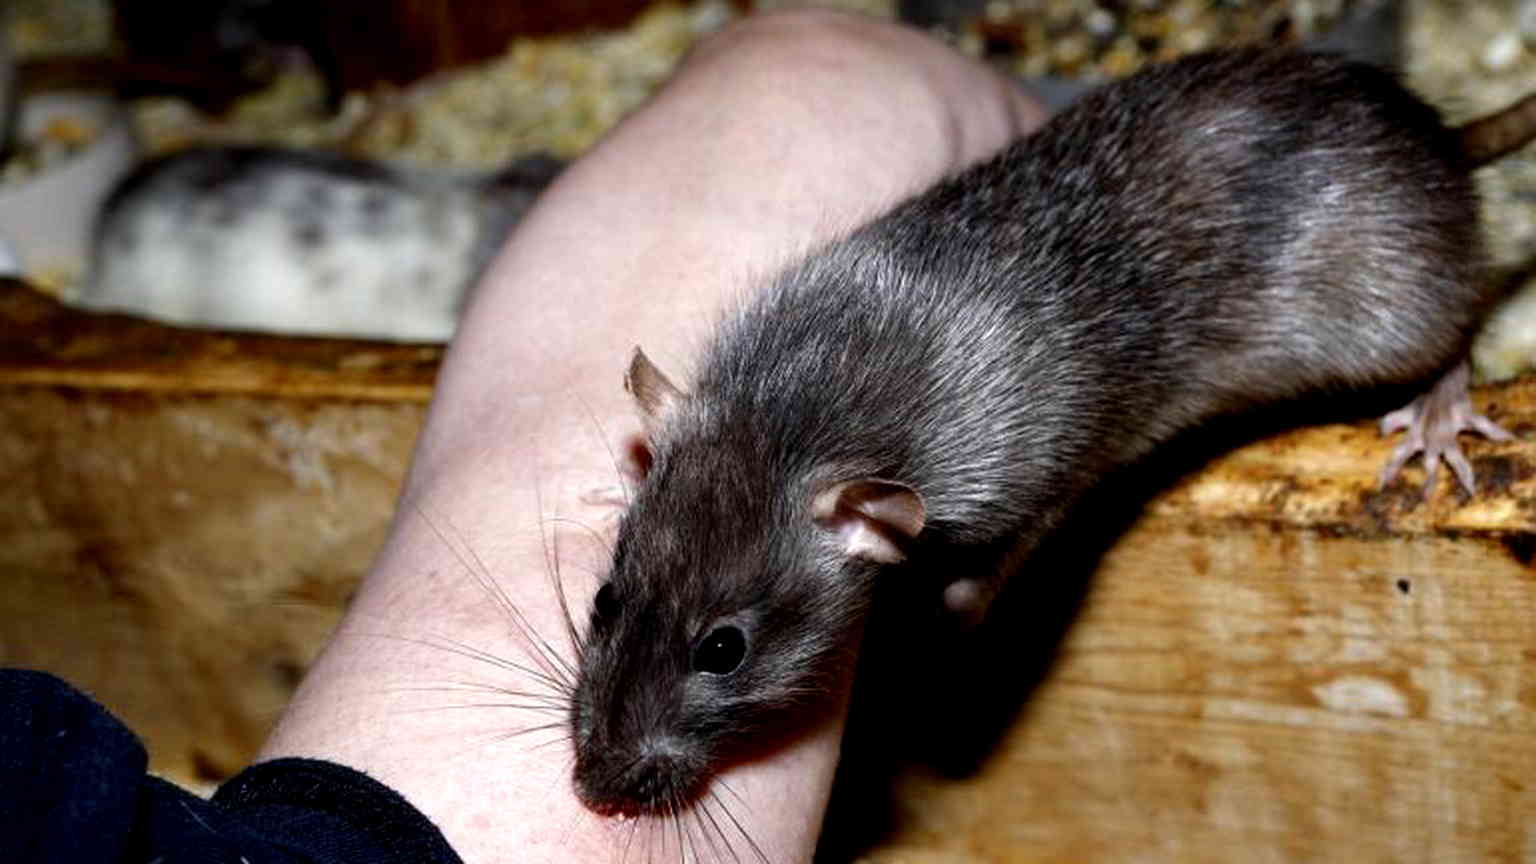 Why Filipinos call rats ‘mabait’ or ‘good ones’